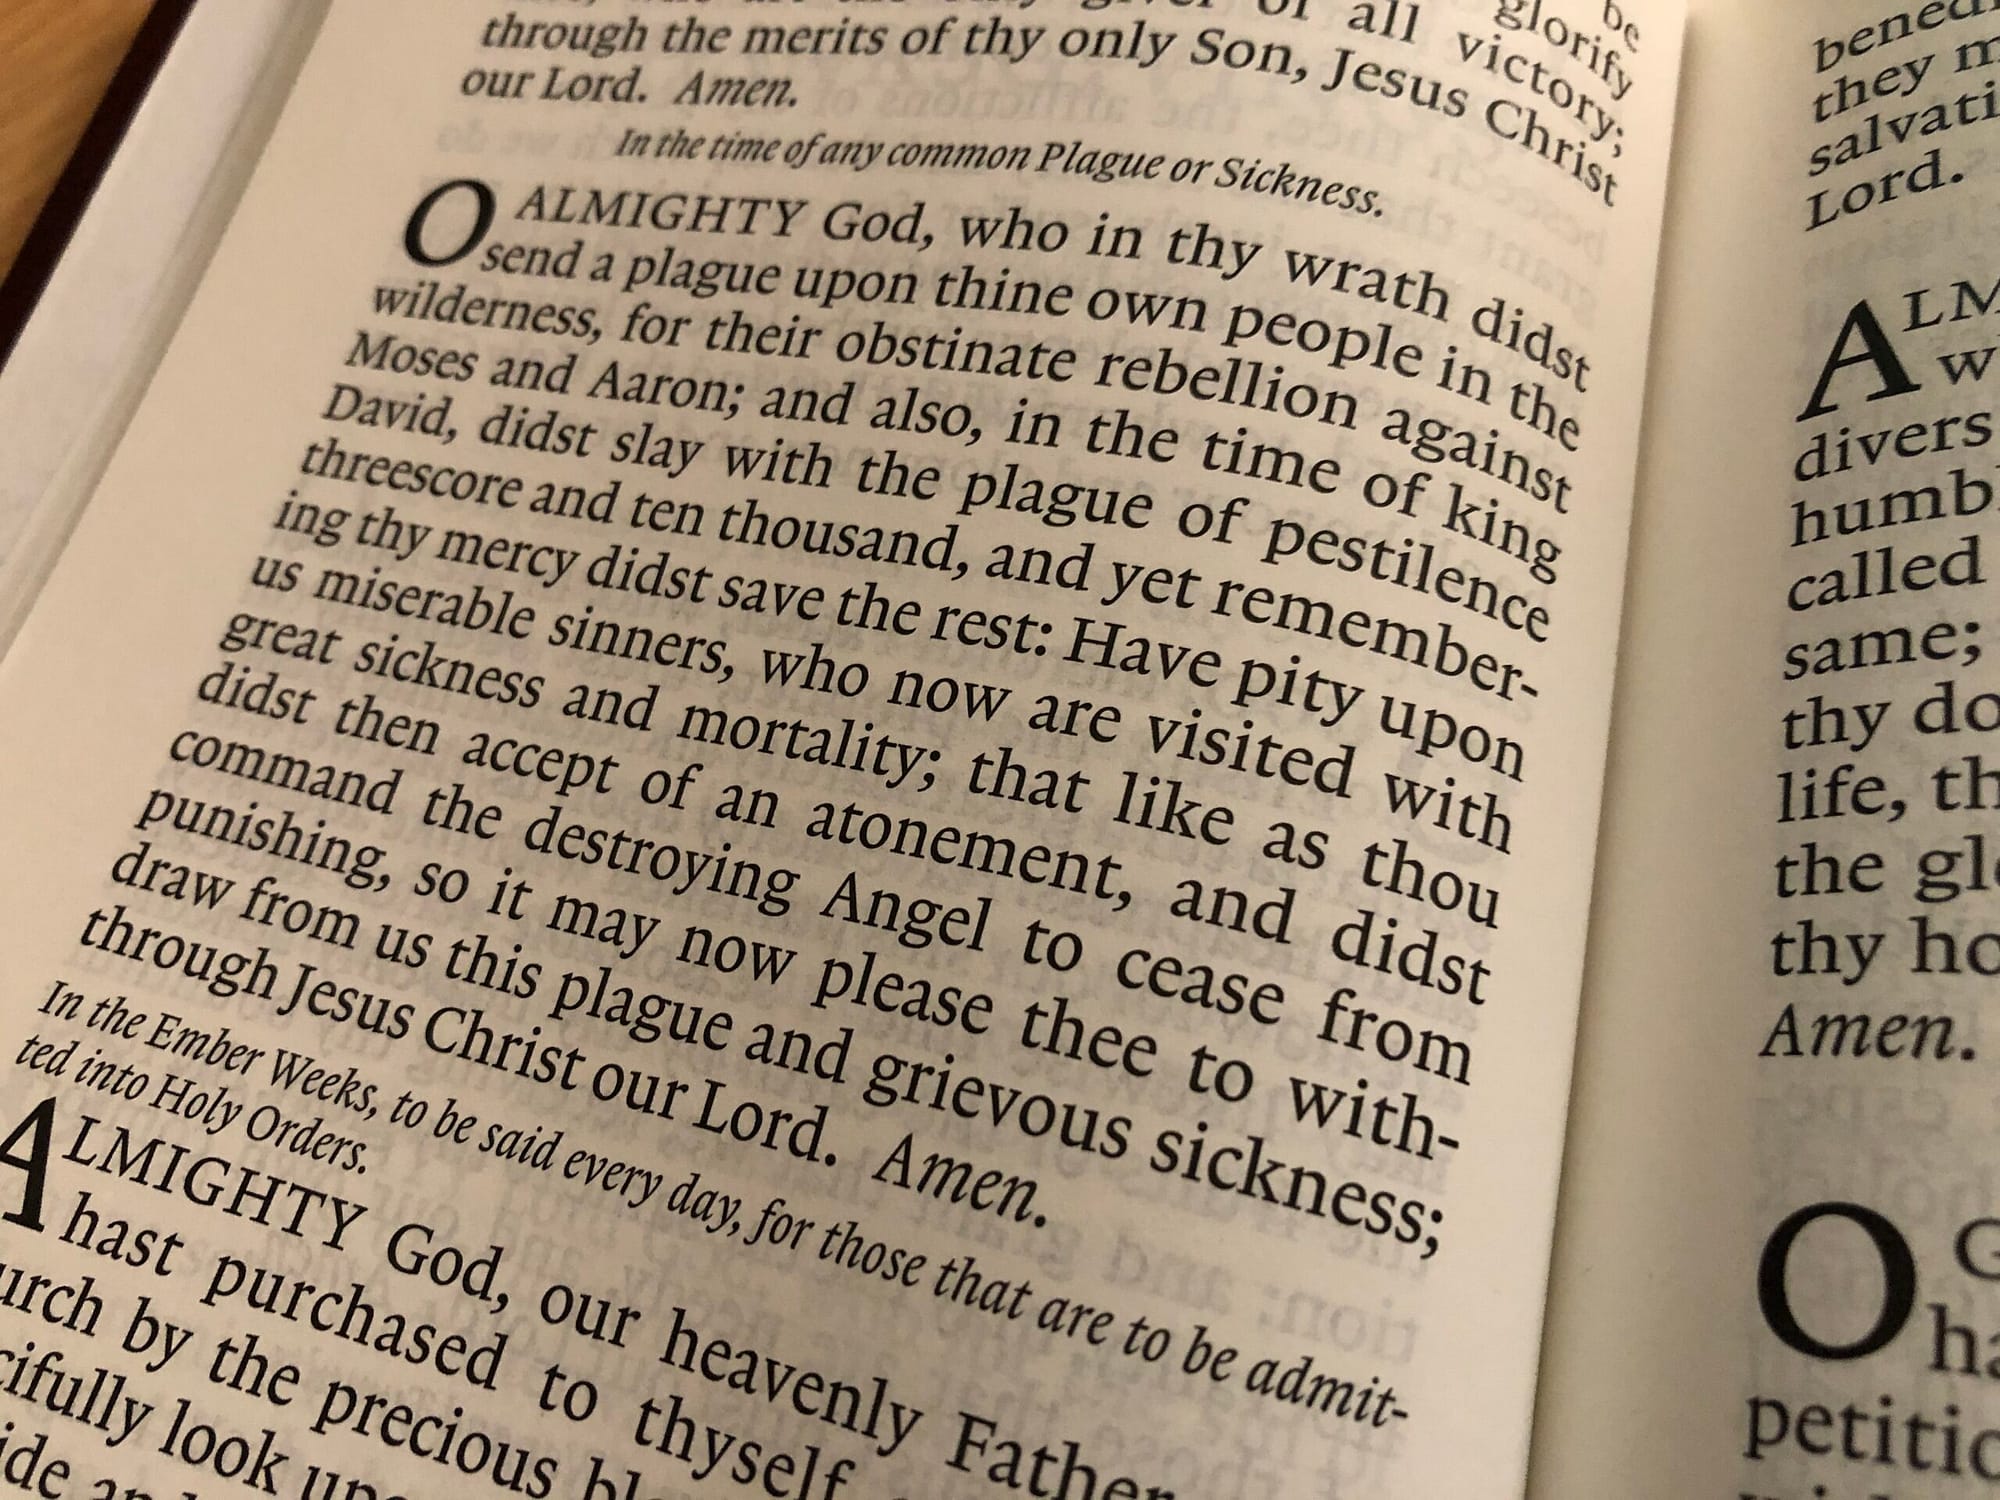 Book of Common Prayer - prayer in any time of common plague or sickness